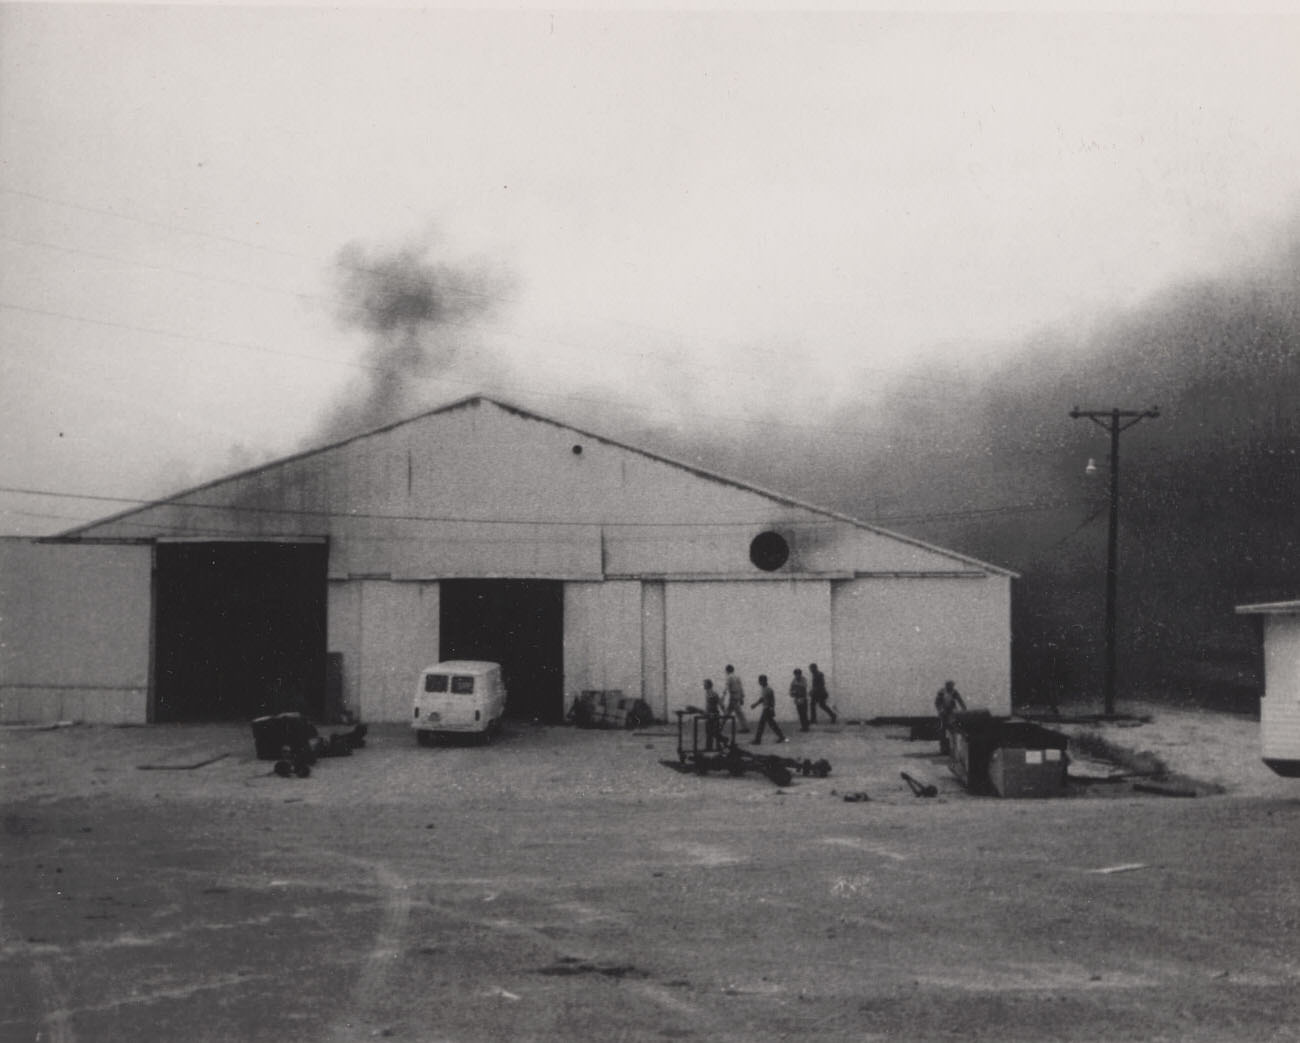 A building on fire a 4500 S. Cooper Street in Arlington, Texas, 1970